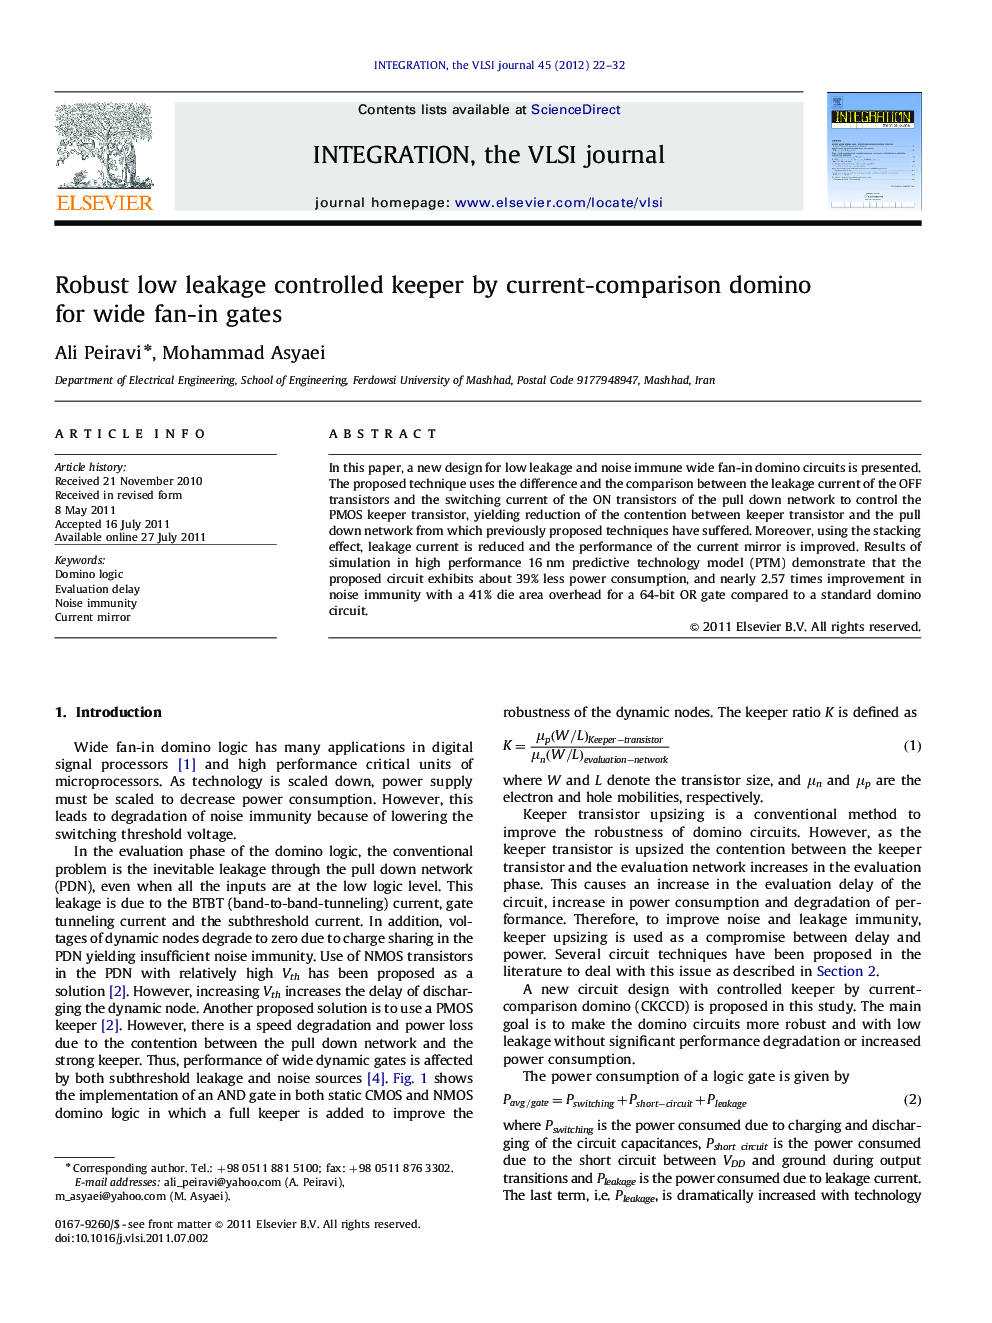 Robust low leakage controlled keeper by current-comparison domino for wide fan-in gates